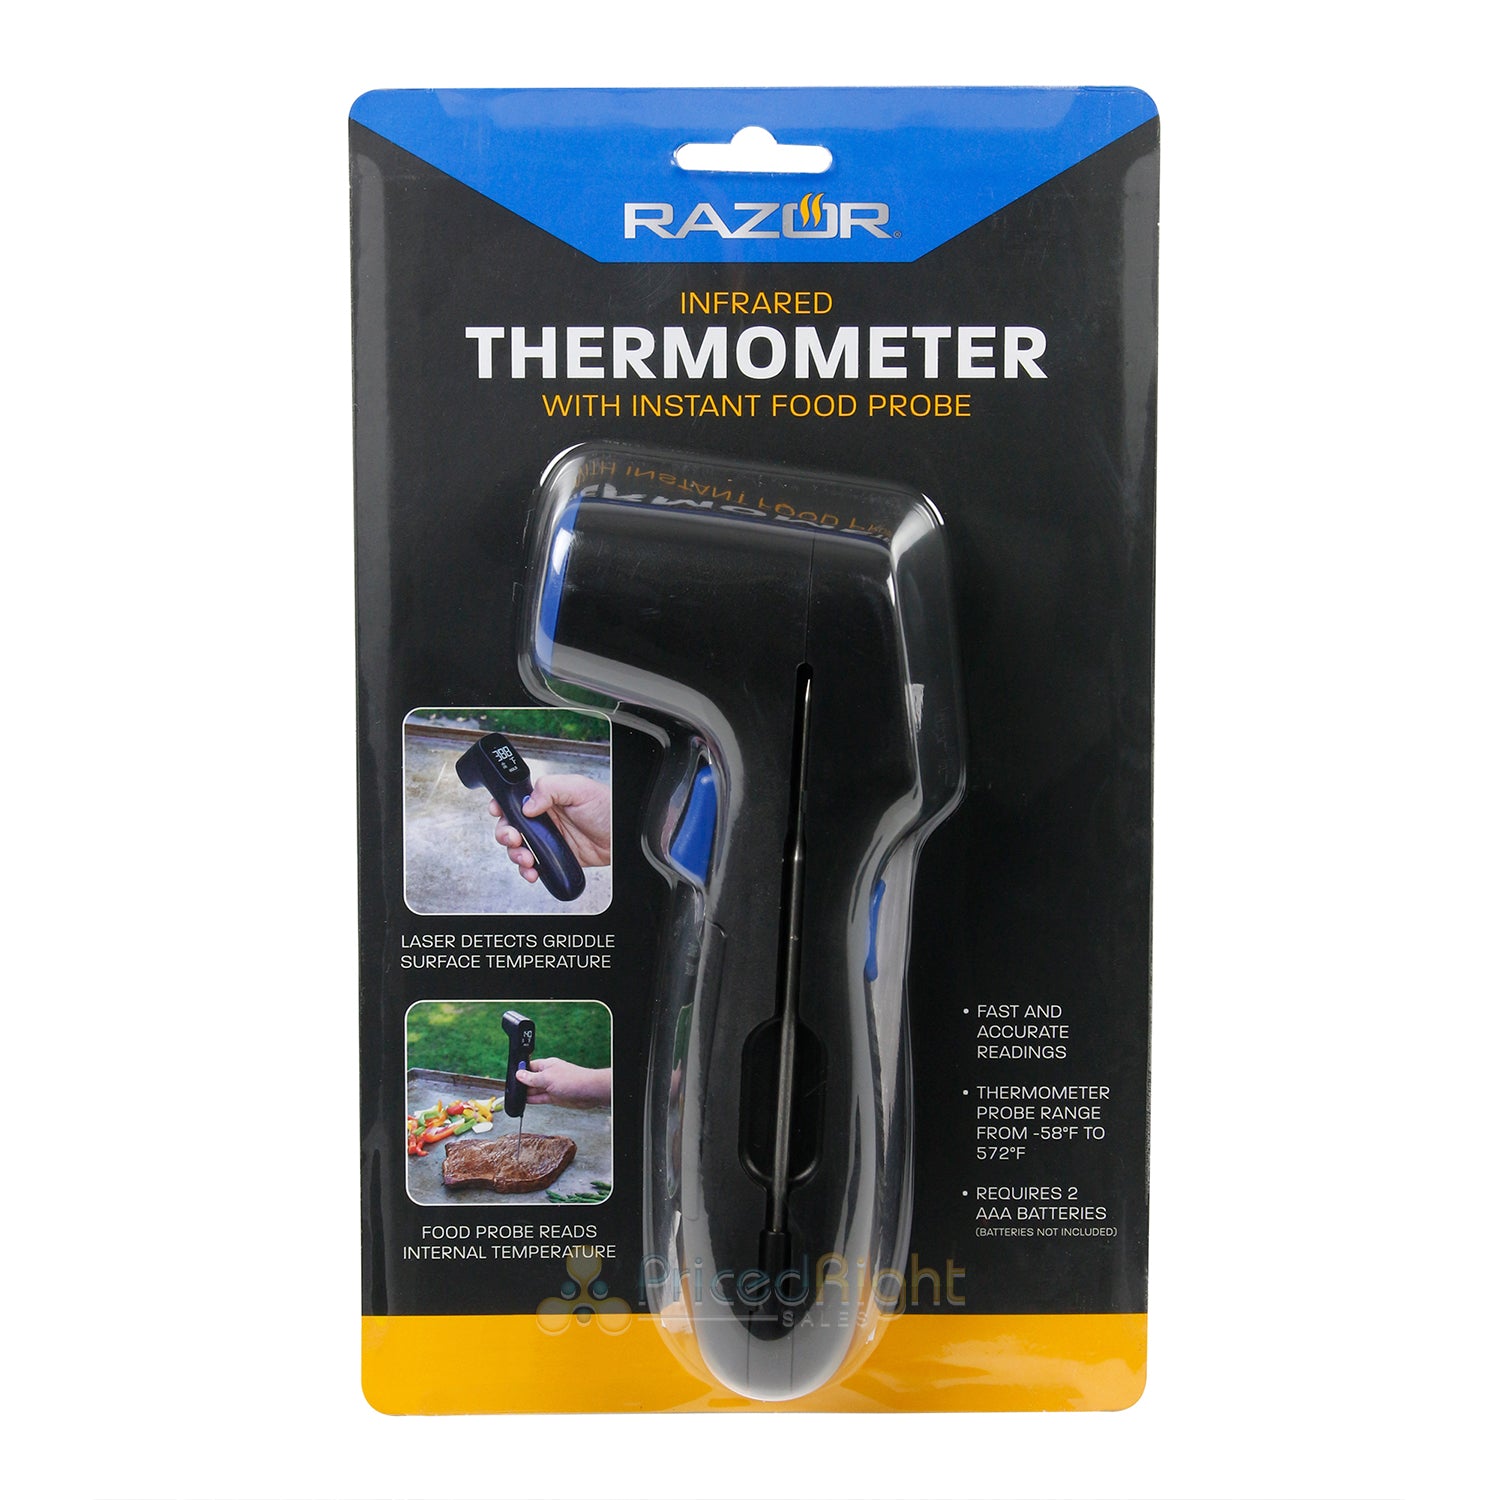 Razor Infrared Laser Digital Thermometer & Instant Food Probe W/ LCD Screen